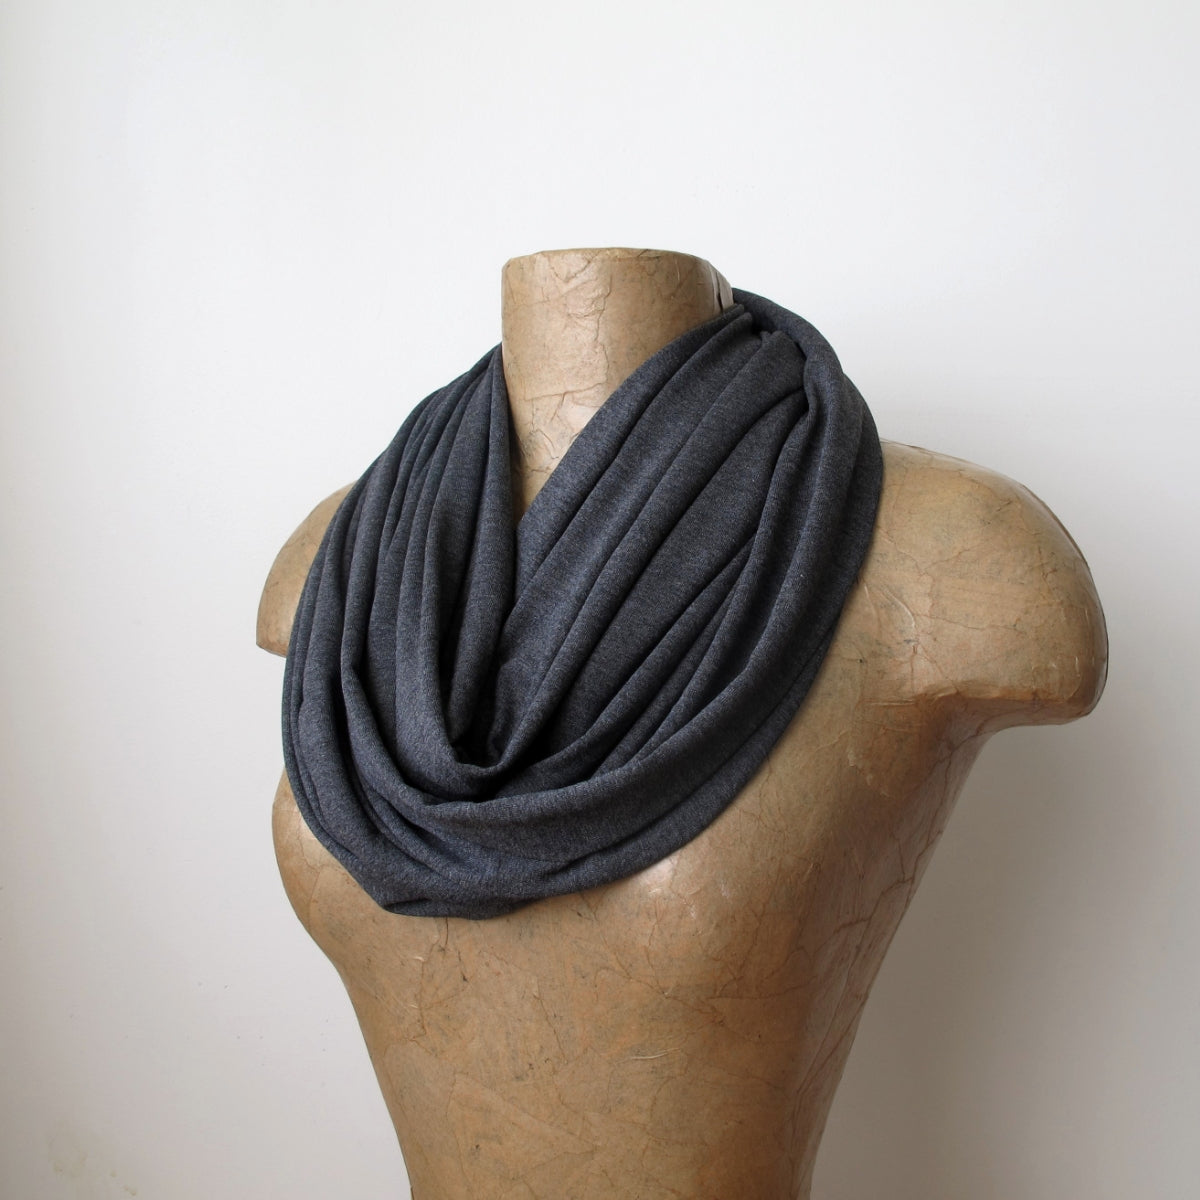 CHARCOAL GRAY Infinity Scarf